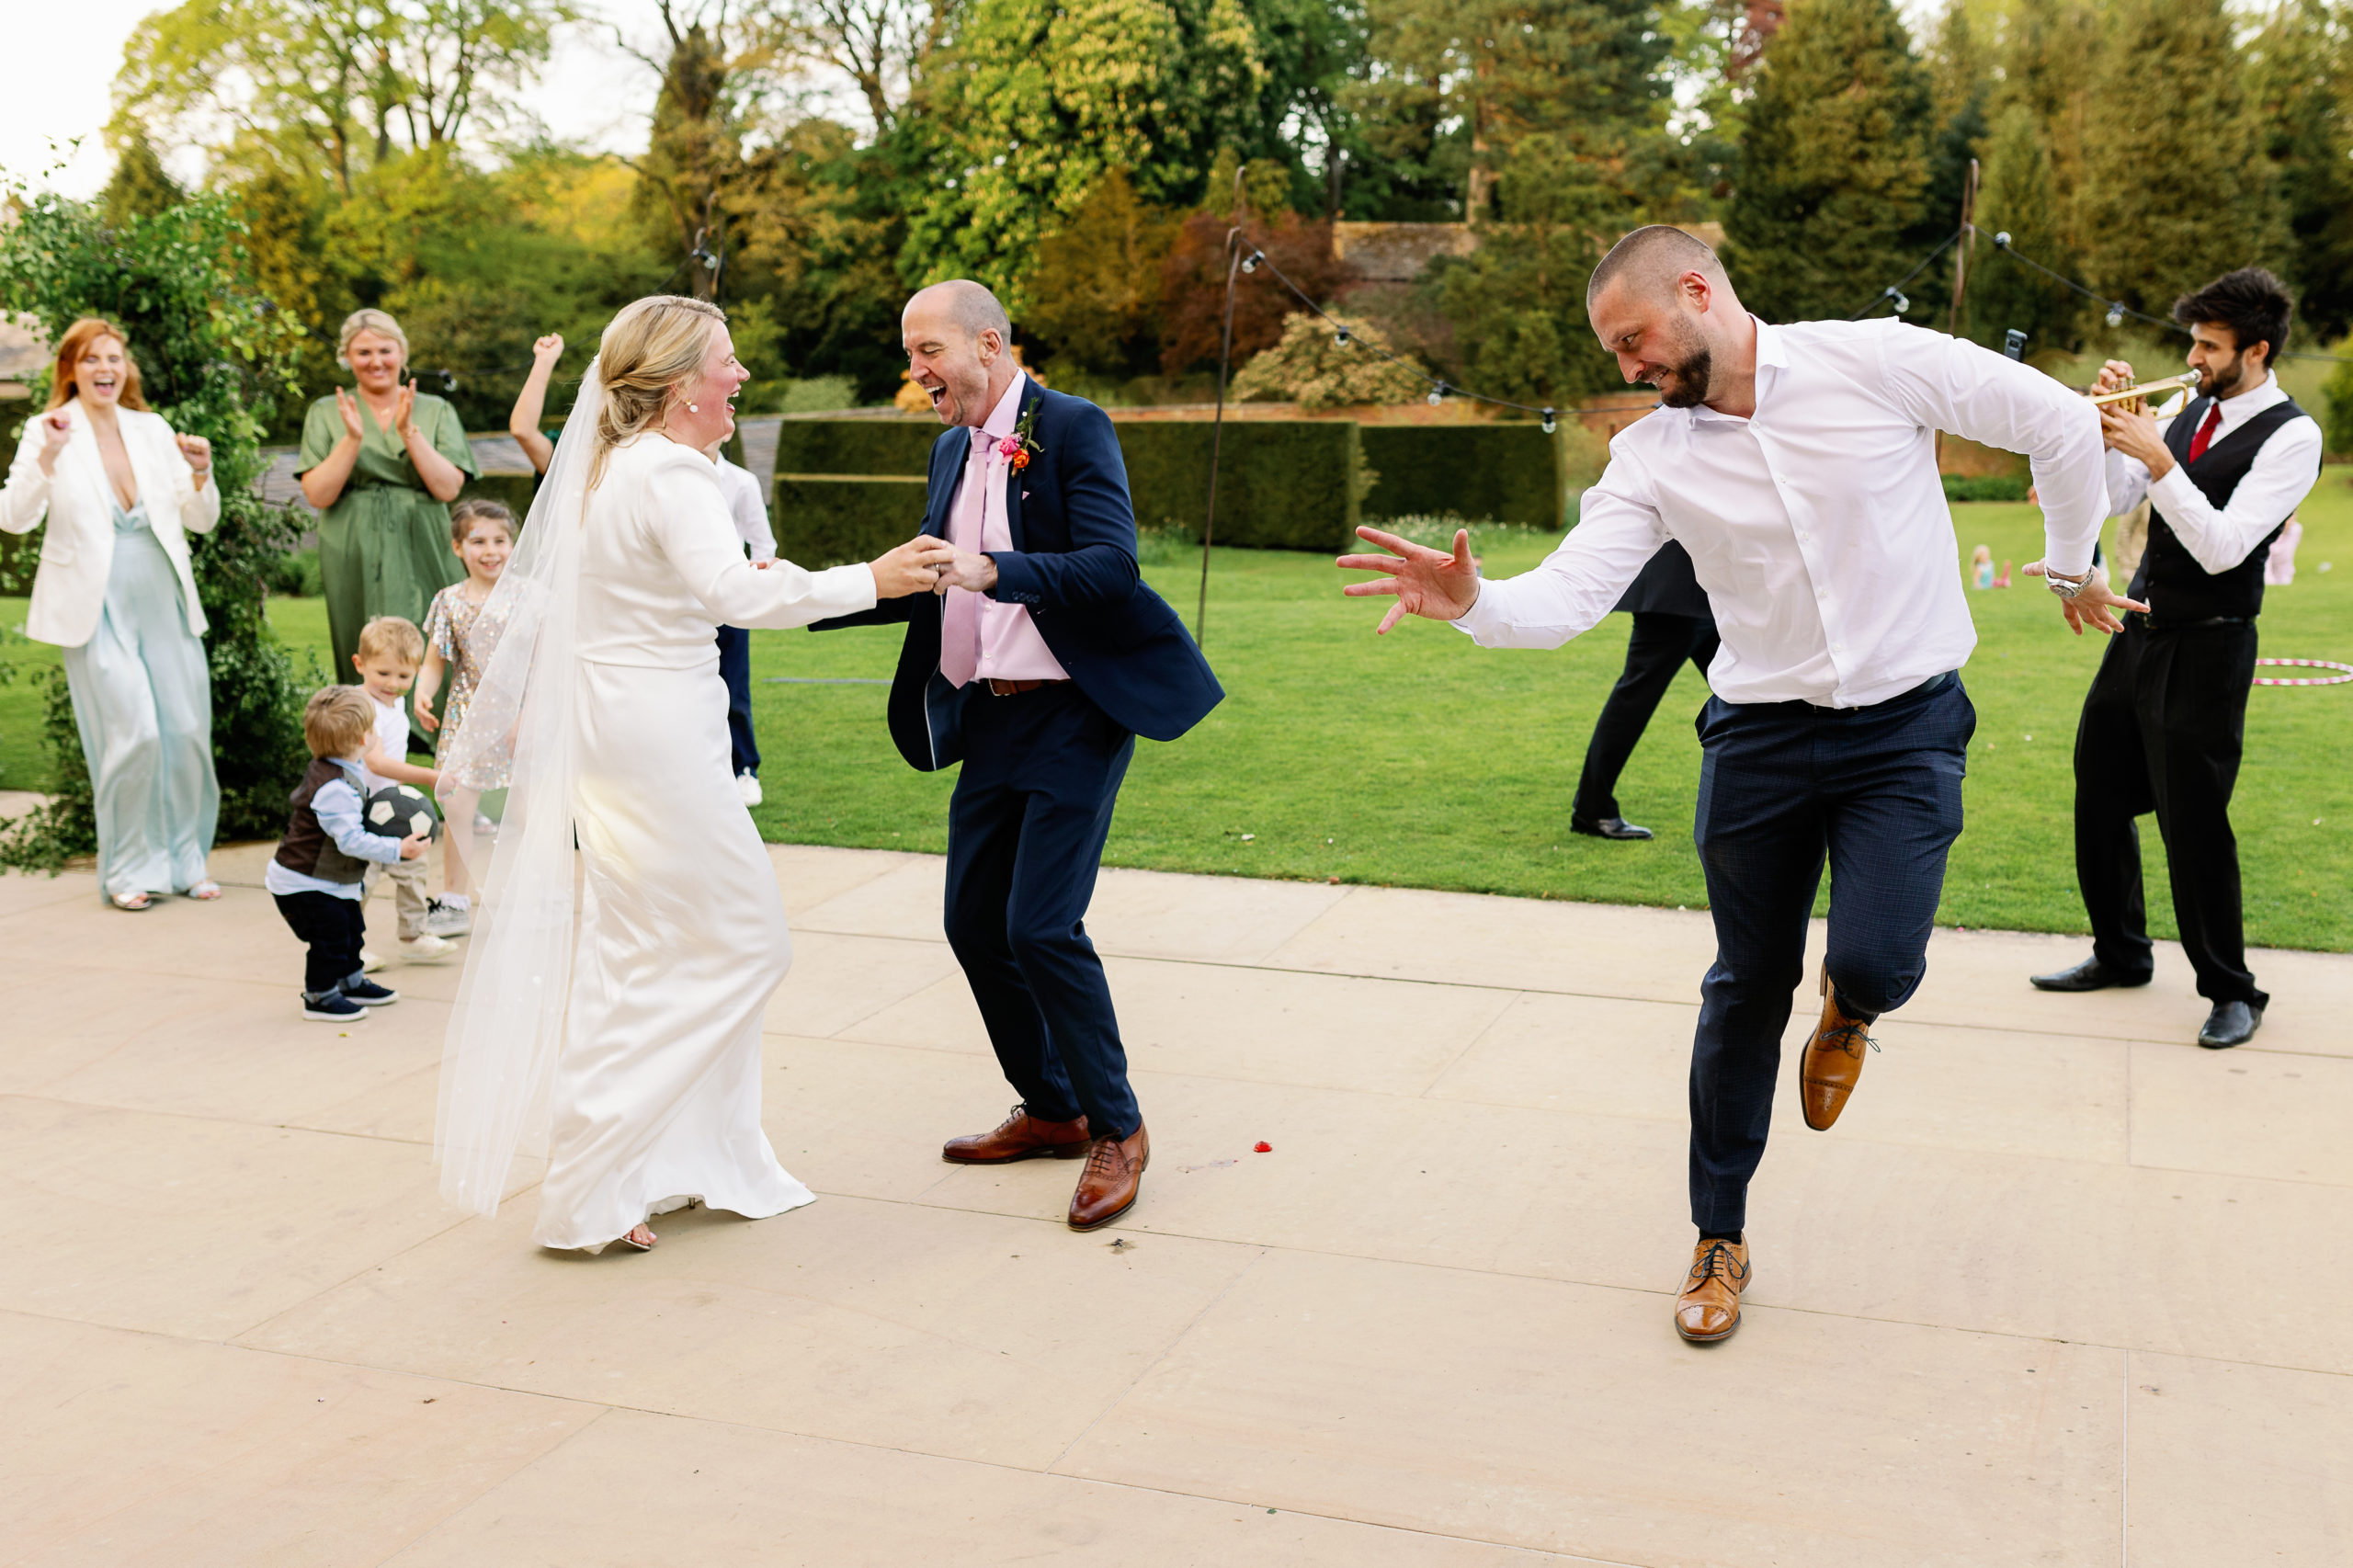 Fun Dancing Pictures at a Spring Yorkshire Wedding